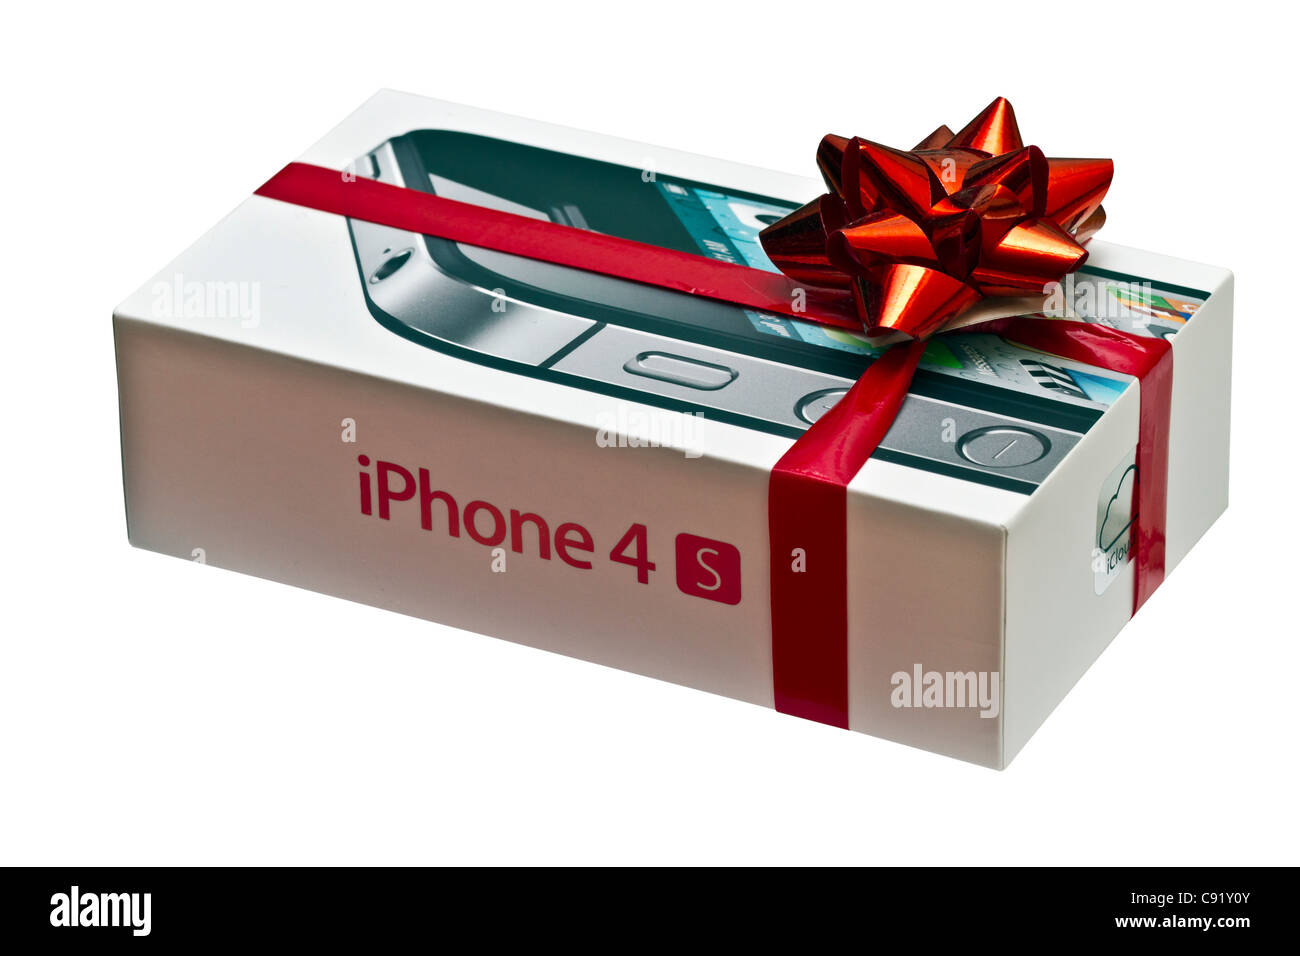 Iphone 4S in its case, gift-wrapped Stock Photo